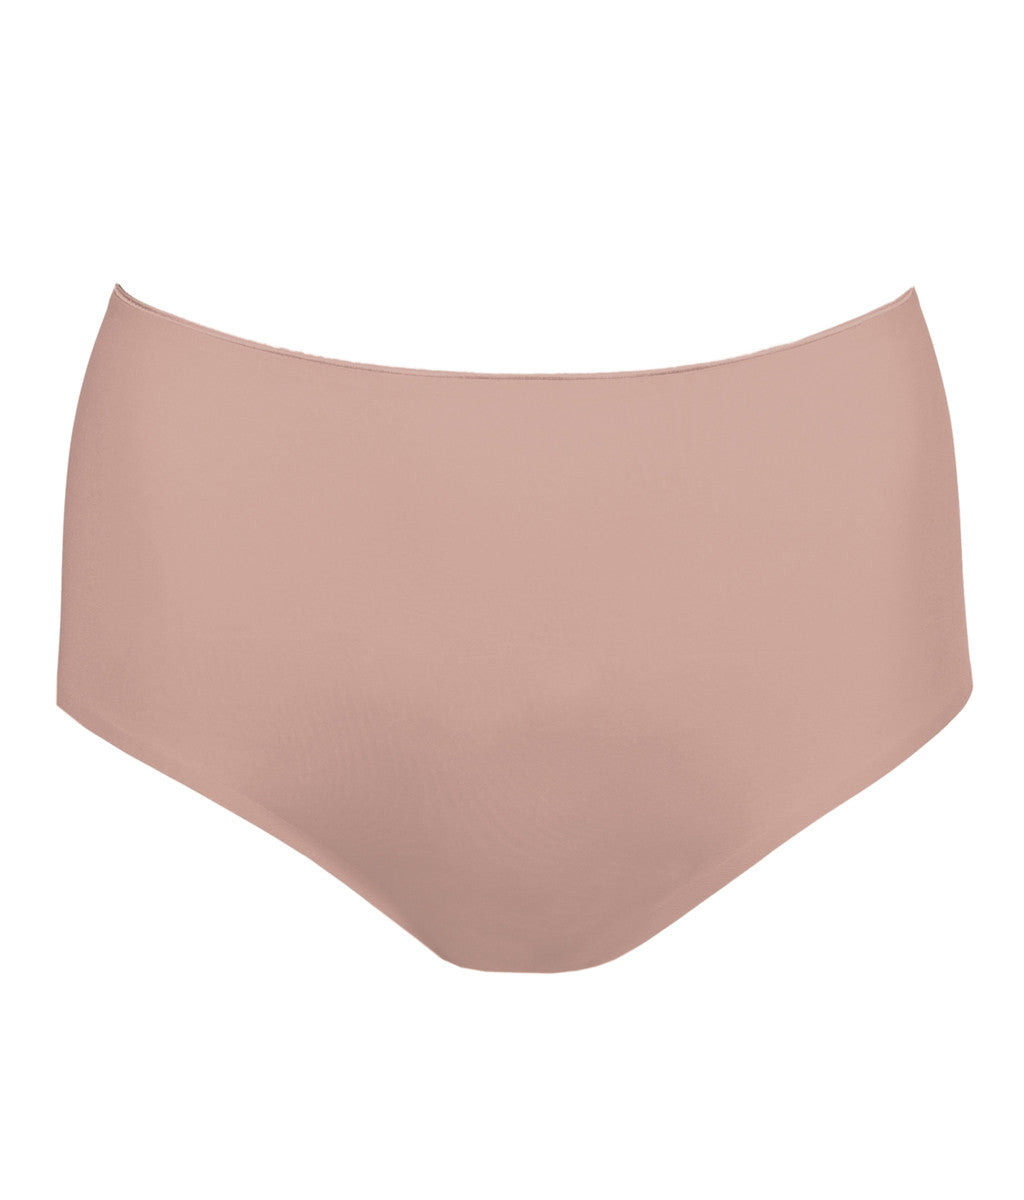 Marie Jo 'Color Studio' Basic (Patine) Full Brief - Sandra Dee - Product Shot - Front